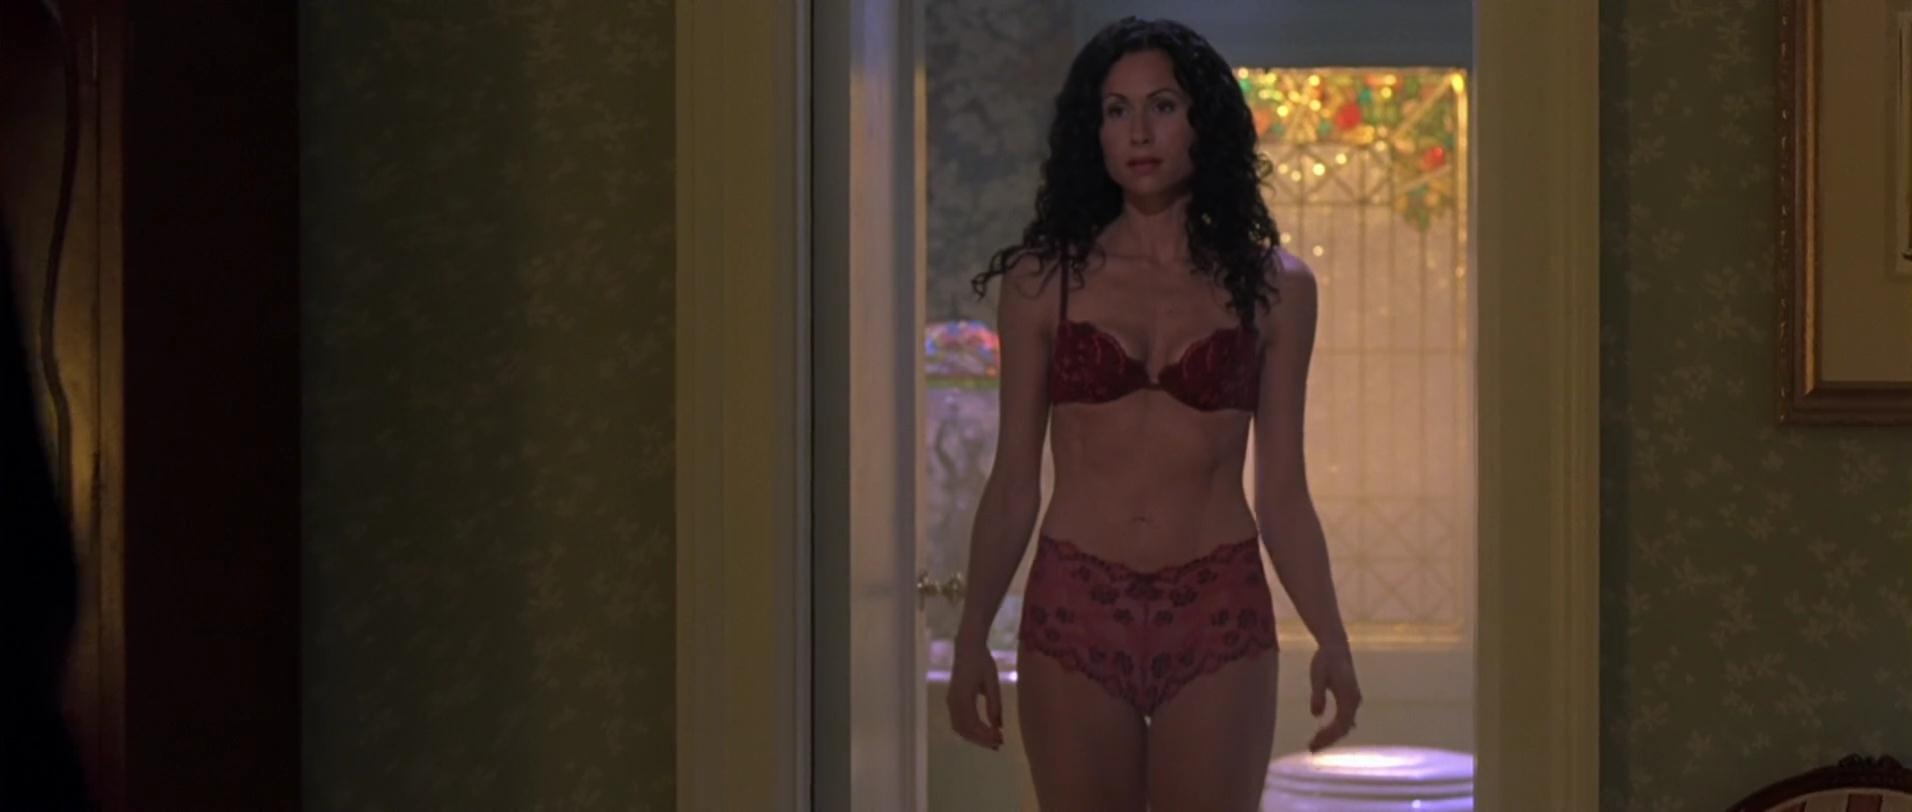 Minnie driver naked fakes